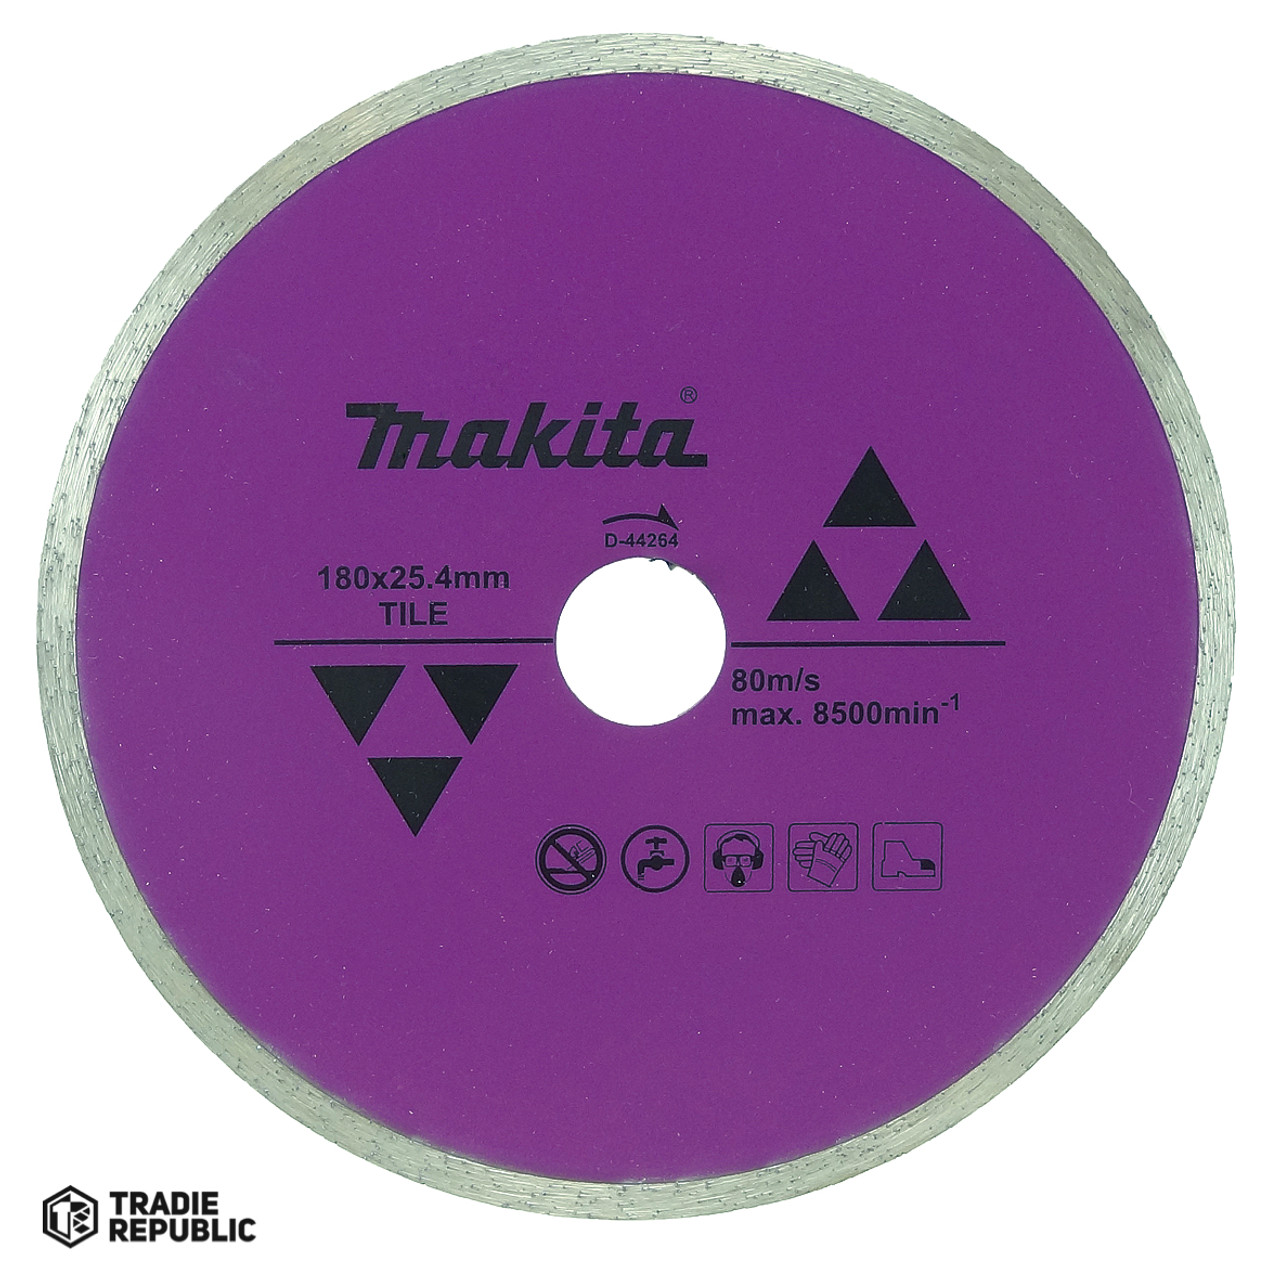 D-44264 Makita Tile Cutting Blade D-44264 - Continuous Type (STANDARD) suits For 4107RH